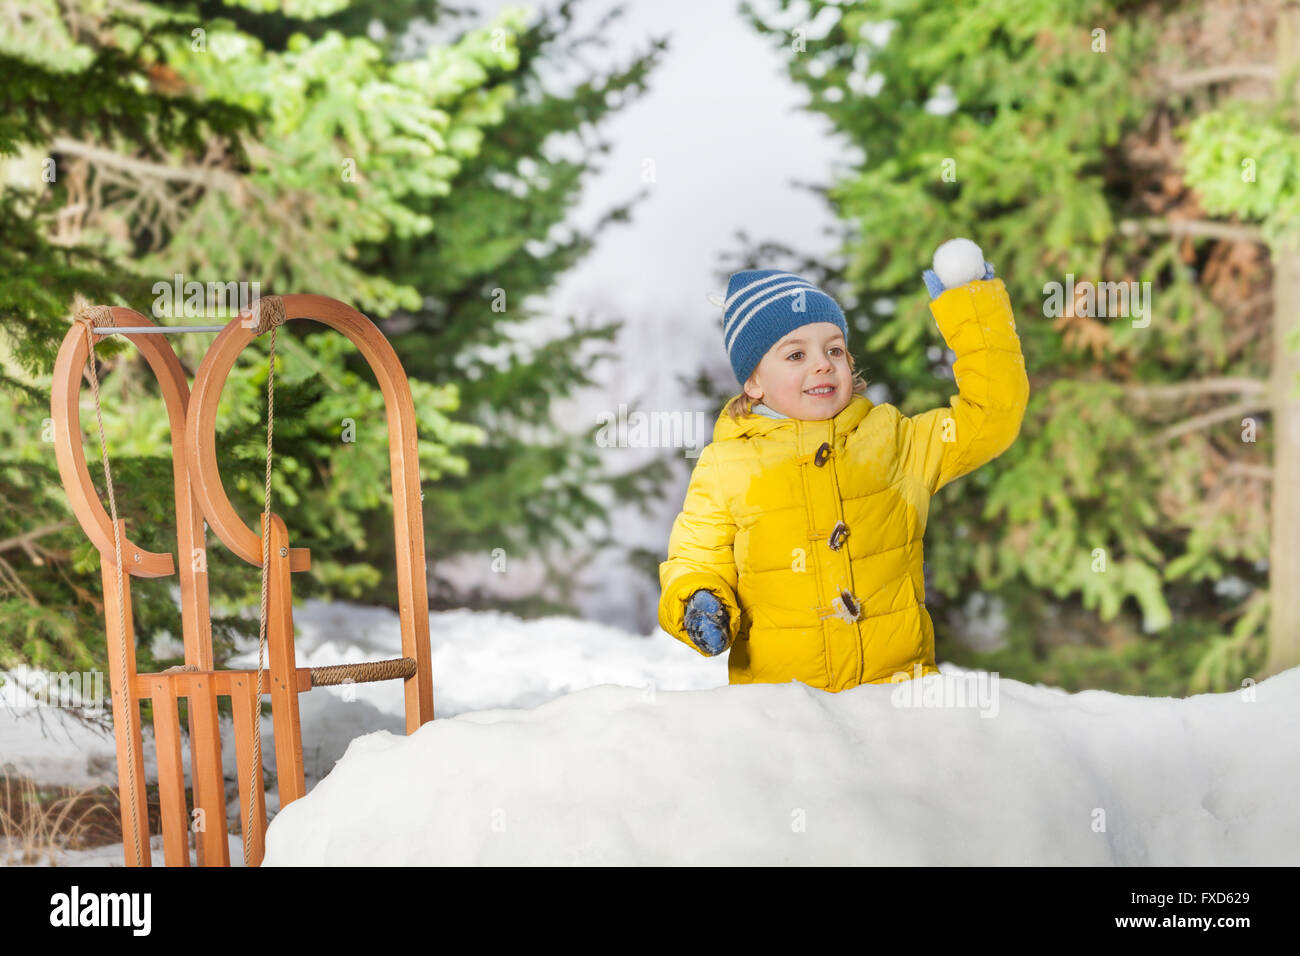 Little boy in snow fortress play snowball fight Stock Photo